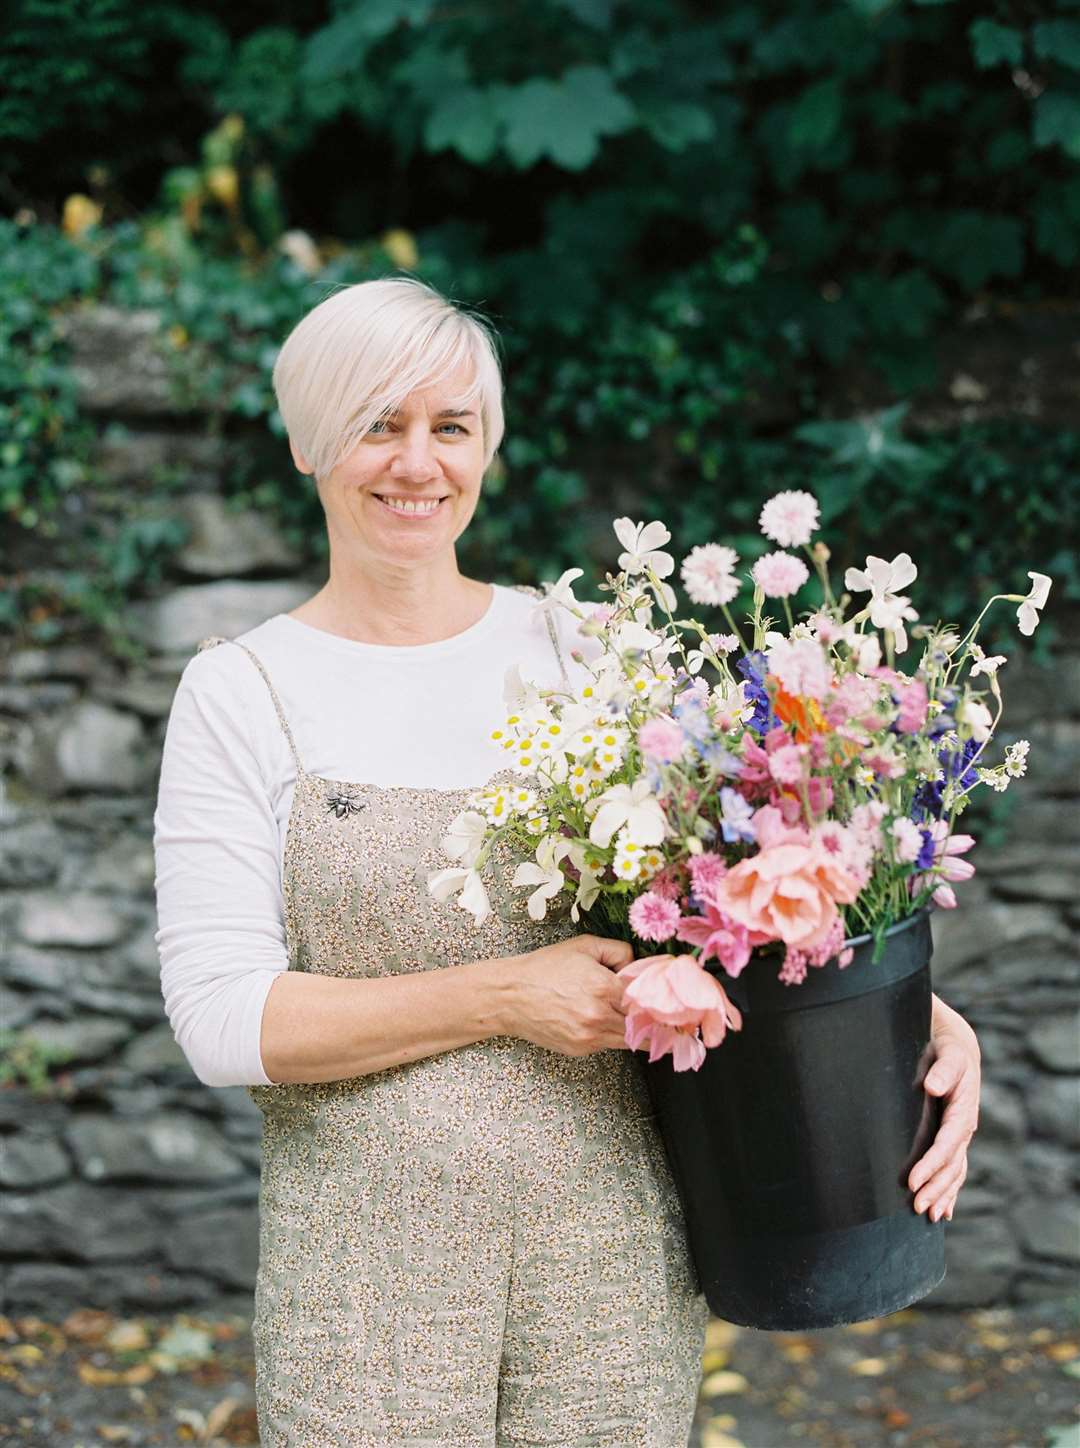 Kirsten Mackay of Henthorn Farm Flowers. Picture: Molly Matcham/PA